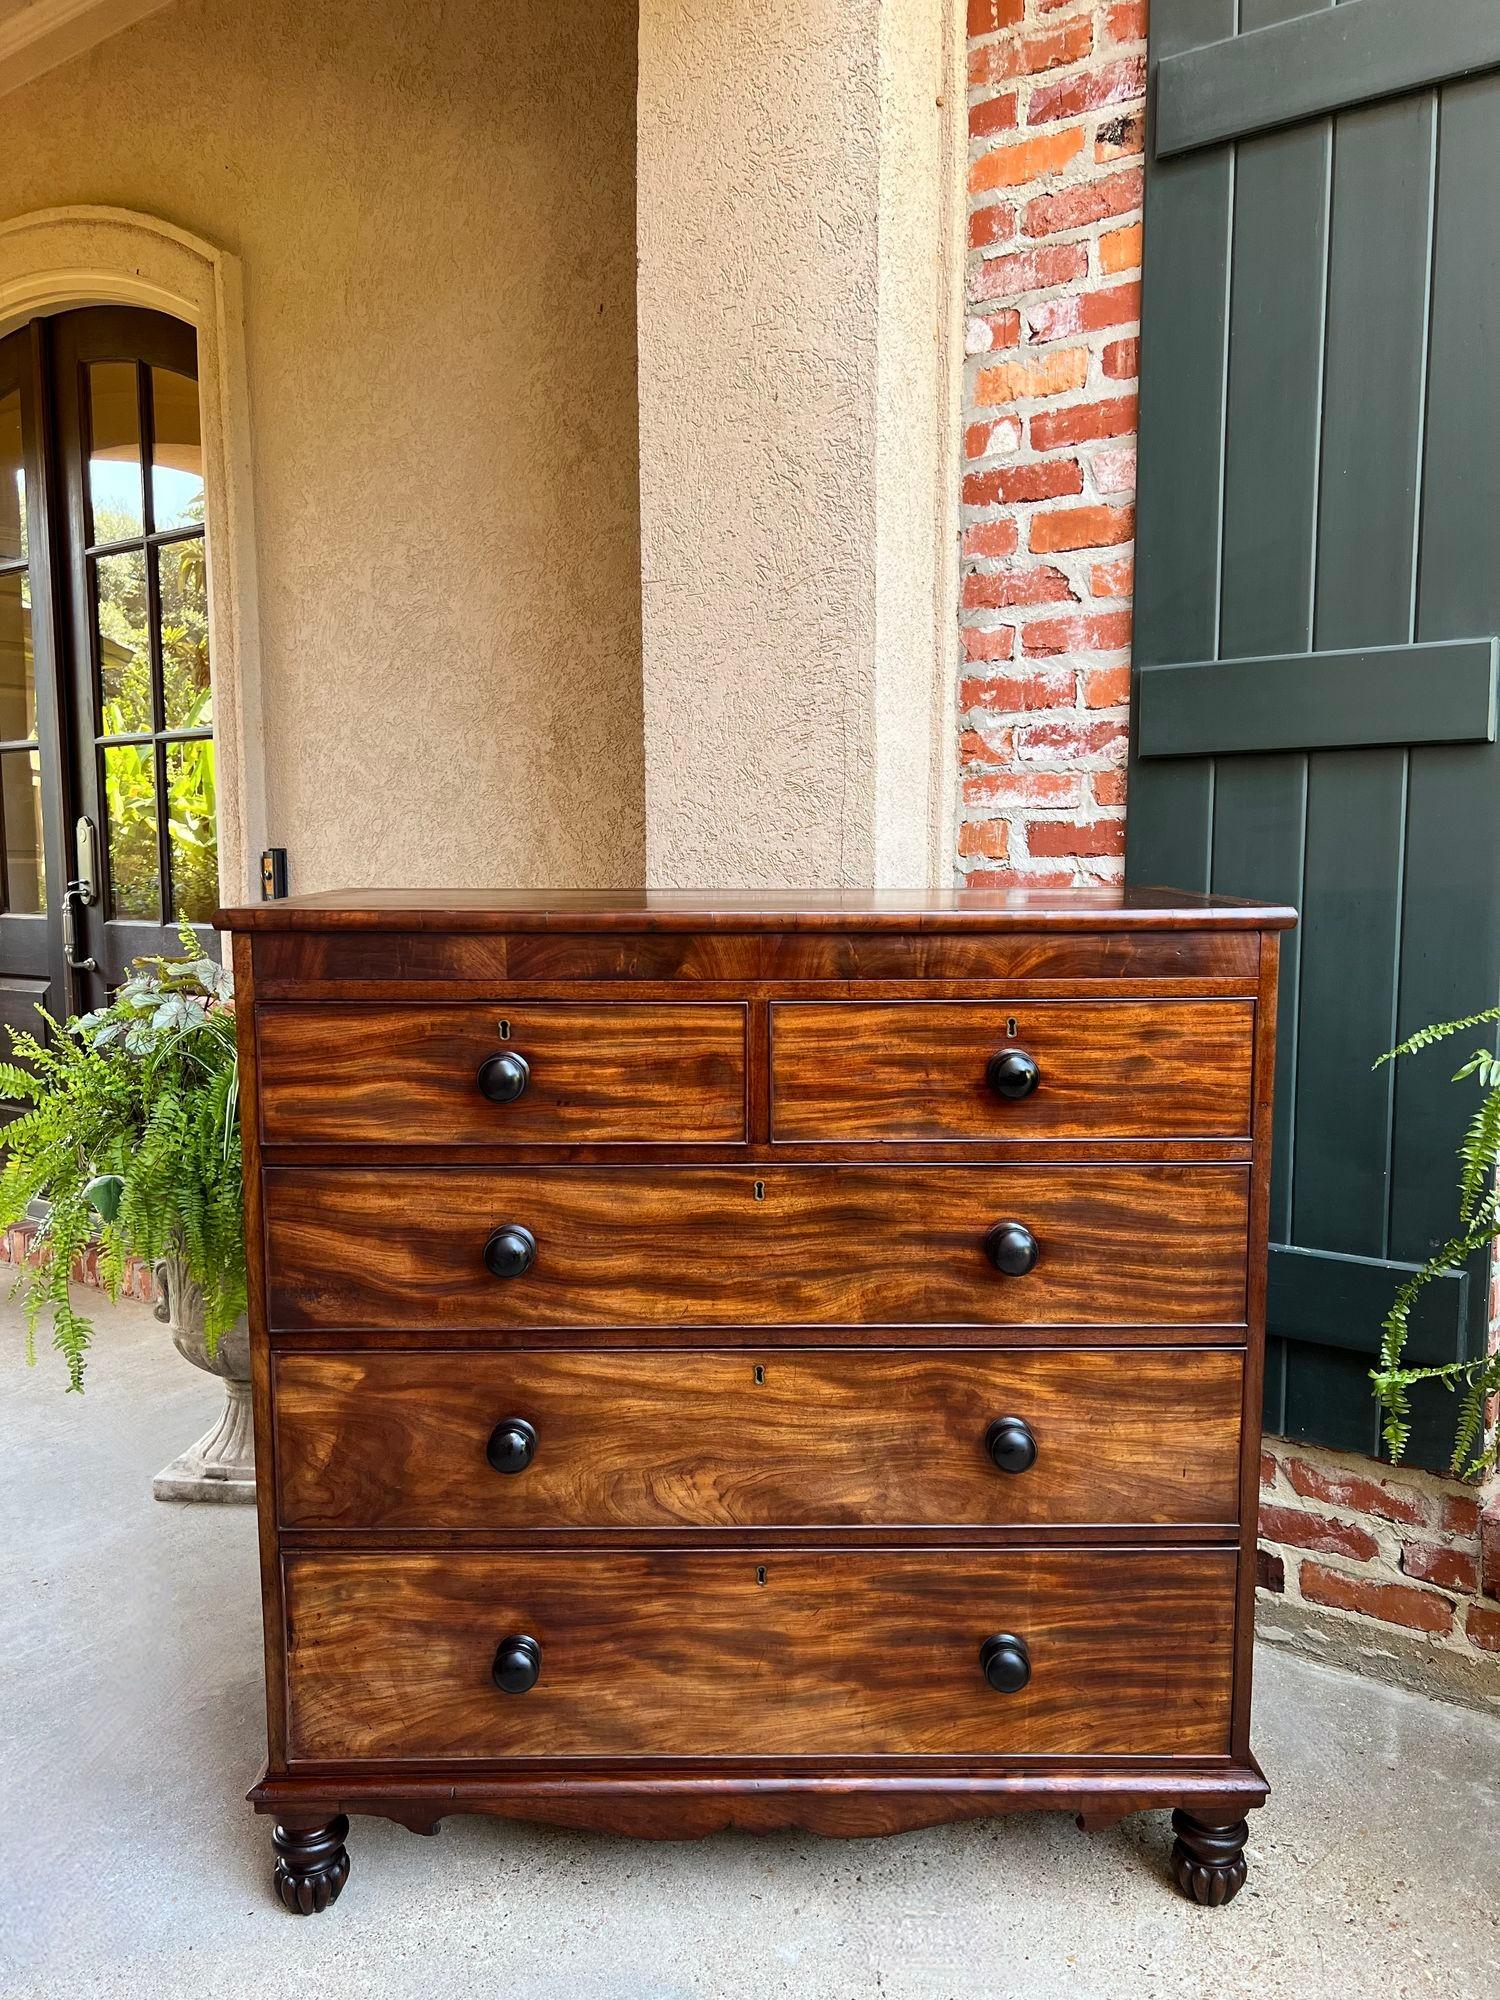 Antique English Chest of Drawers Burl Mahogany Victorian Dresser Cabinet.

Direct from England, a superb 19th century chest of drawers. Classic British style and traditional form with two drawers over three drawers in the front.
The chest top and